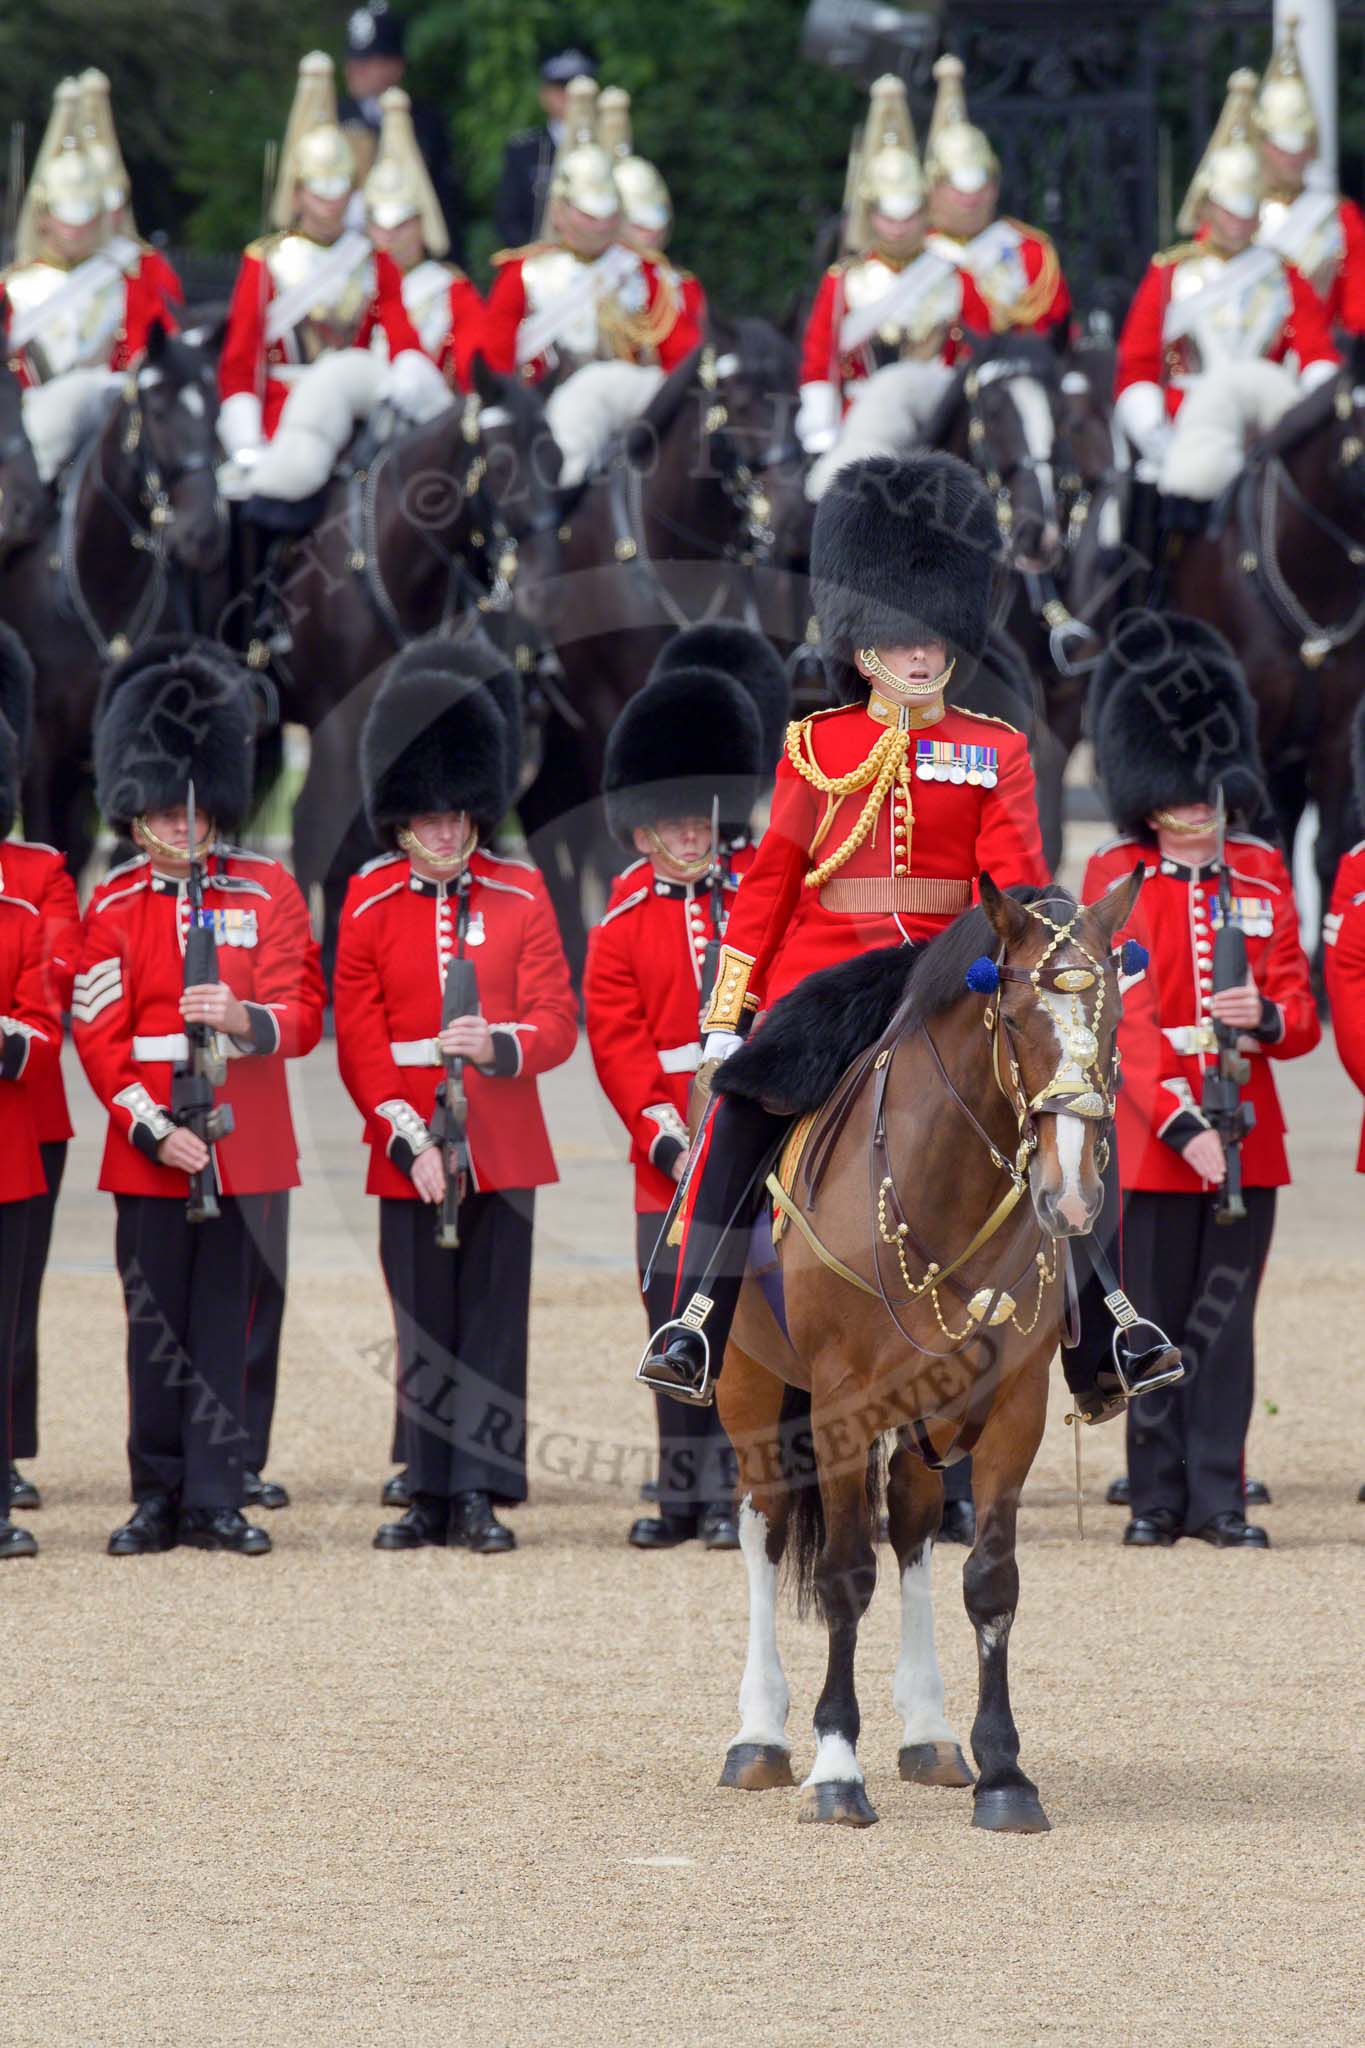 Trooping the Colour 2010: Lt Col C R V Walker, Grenadier Guards, Field Officer in Brigade Waiting and in command of the parade..
Horse Guards Parade, Westminster,
London SW1,
Greater London,
United Kingdom,
on 12 June 2010 at 11:29, image #132